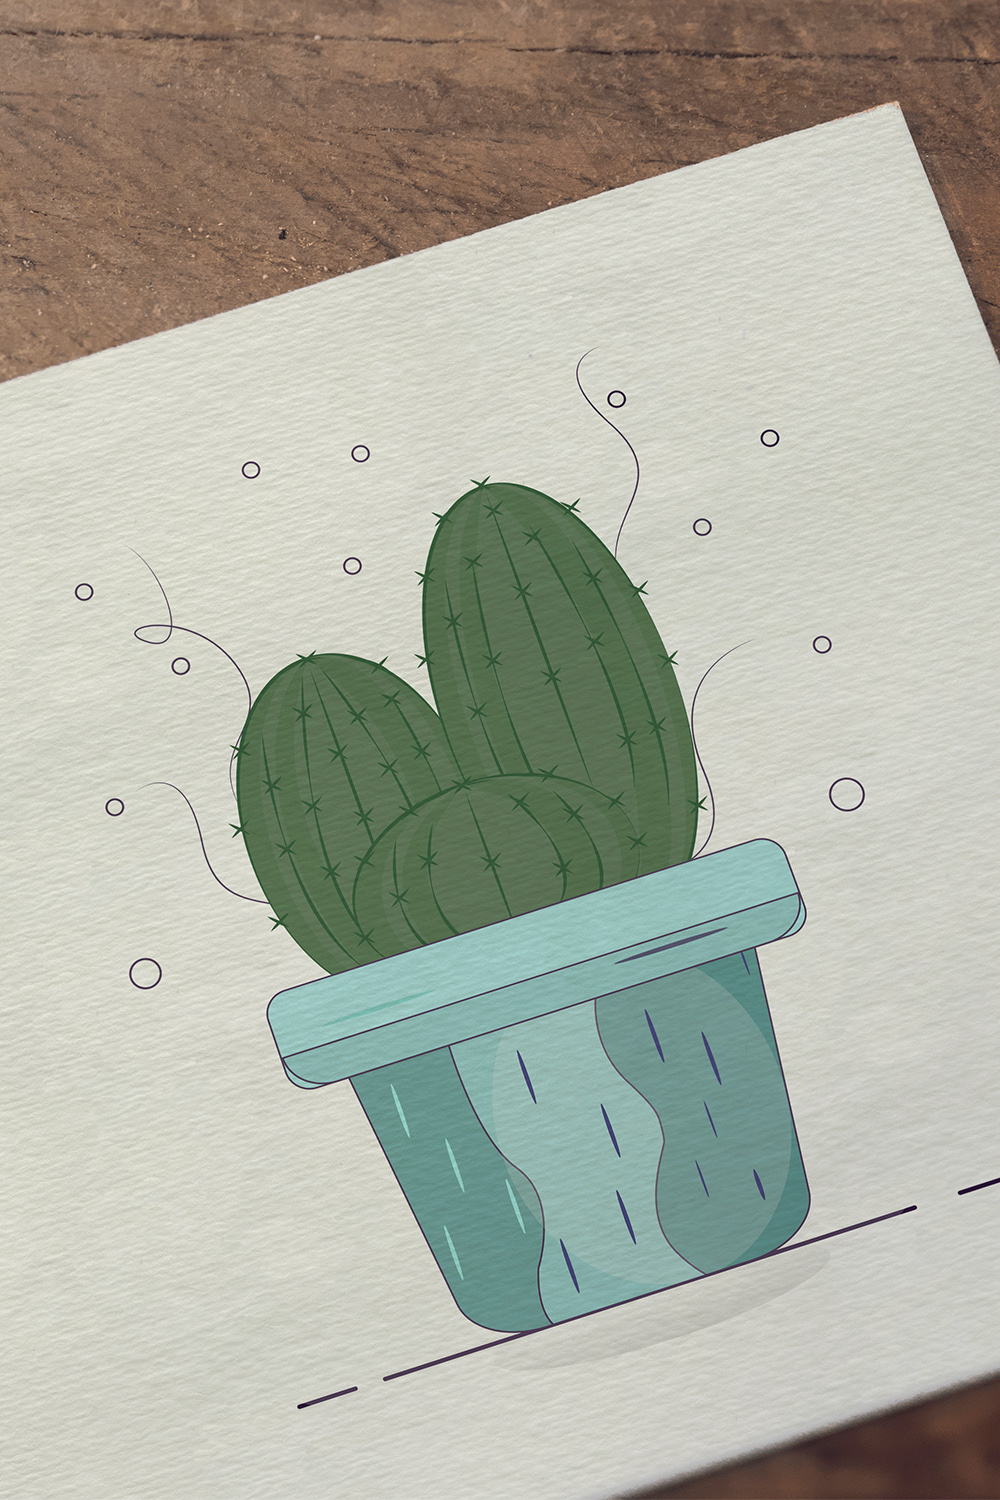 Enchanting image of a cactus in a pot